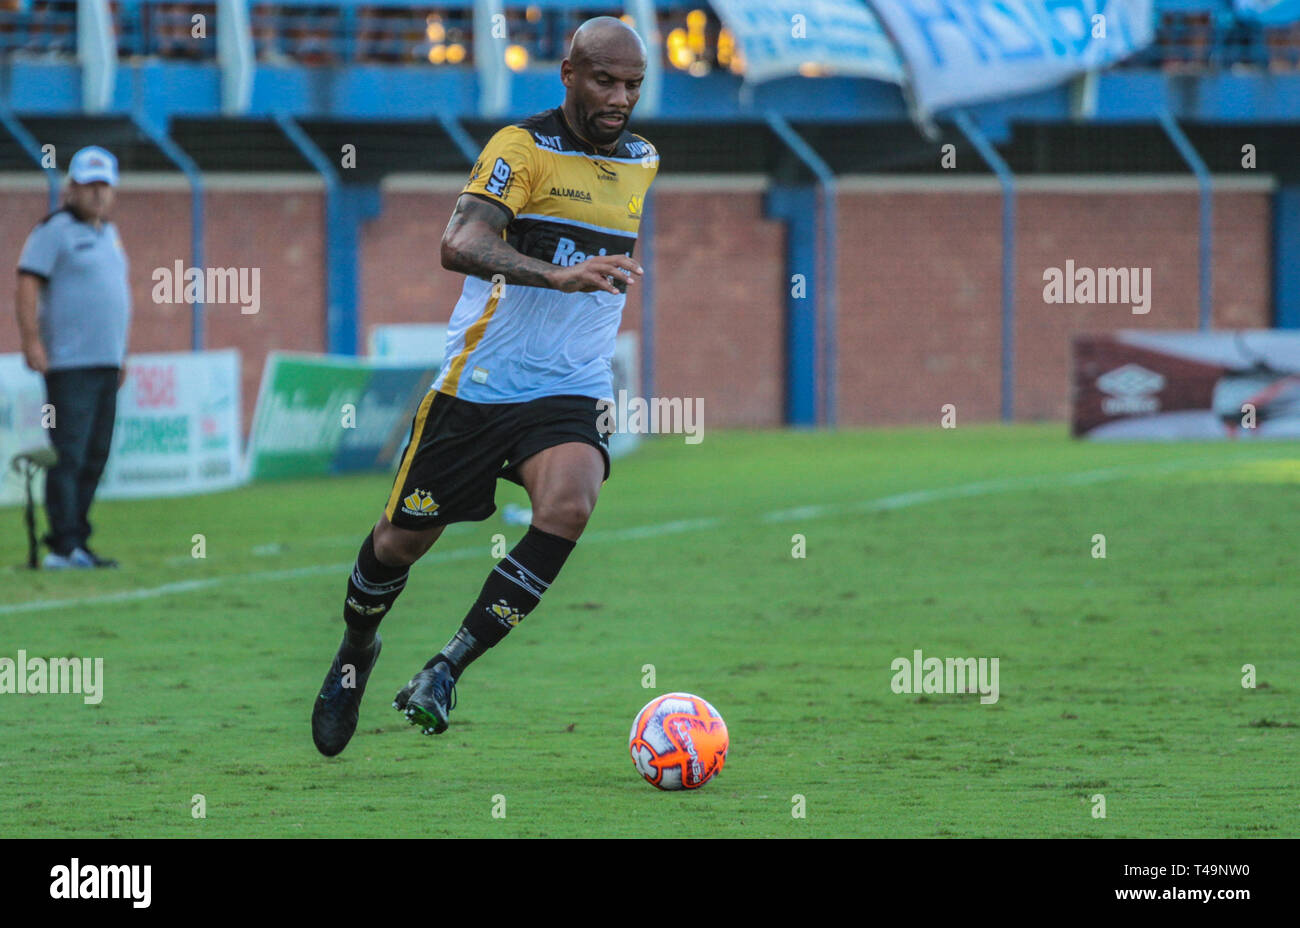 Florianopolis, Brazil. 14th Apr, 2019. SC - Florianopolis - 04/14/2019 - Catarinense 2019, Ava x Crici ma - Maicon player of the Criciuma during match against Avai in the stadium Resurrected by the state championship 2019. Photo: Lucas Sabino/AGIF Credit: AGIF/Alamy Live News Stock Photo